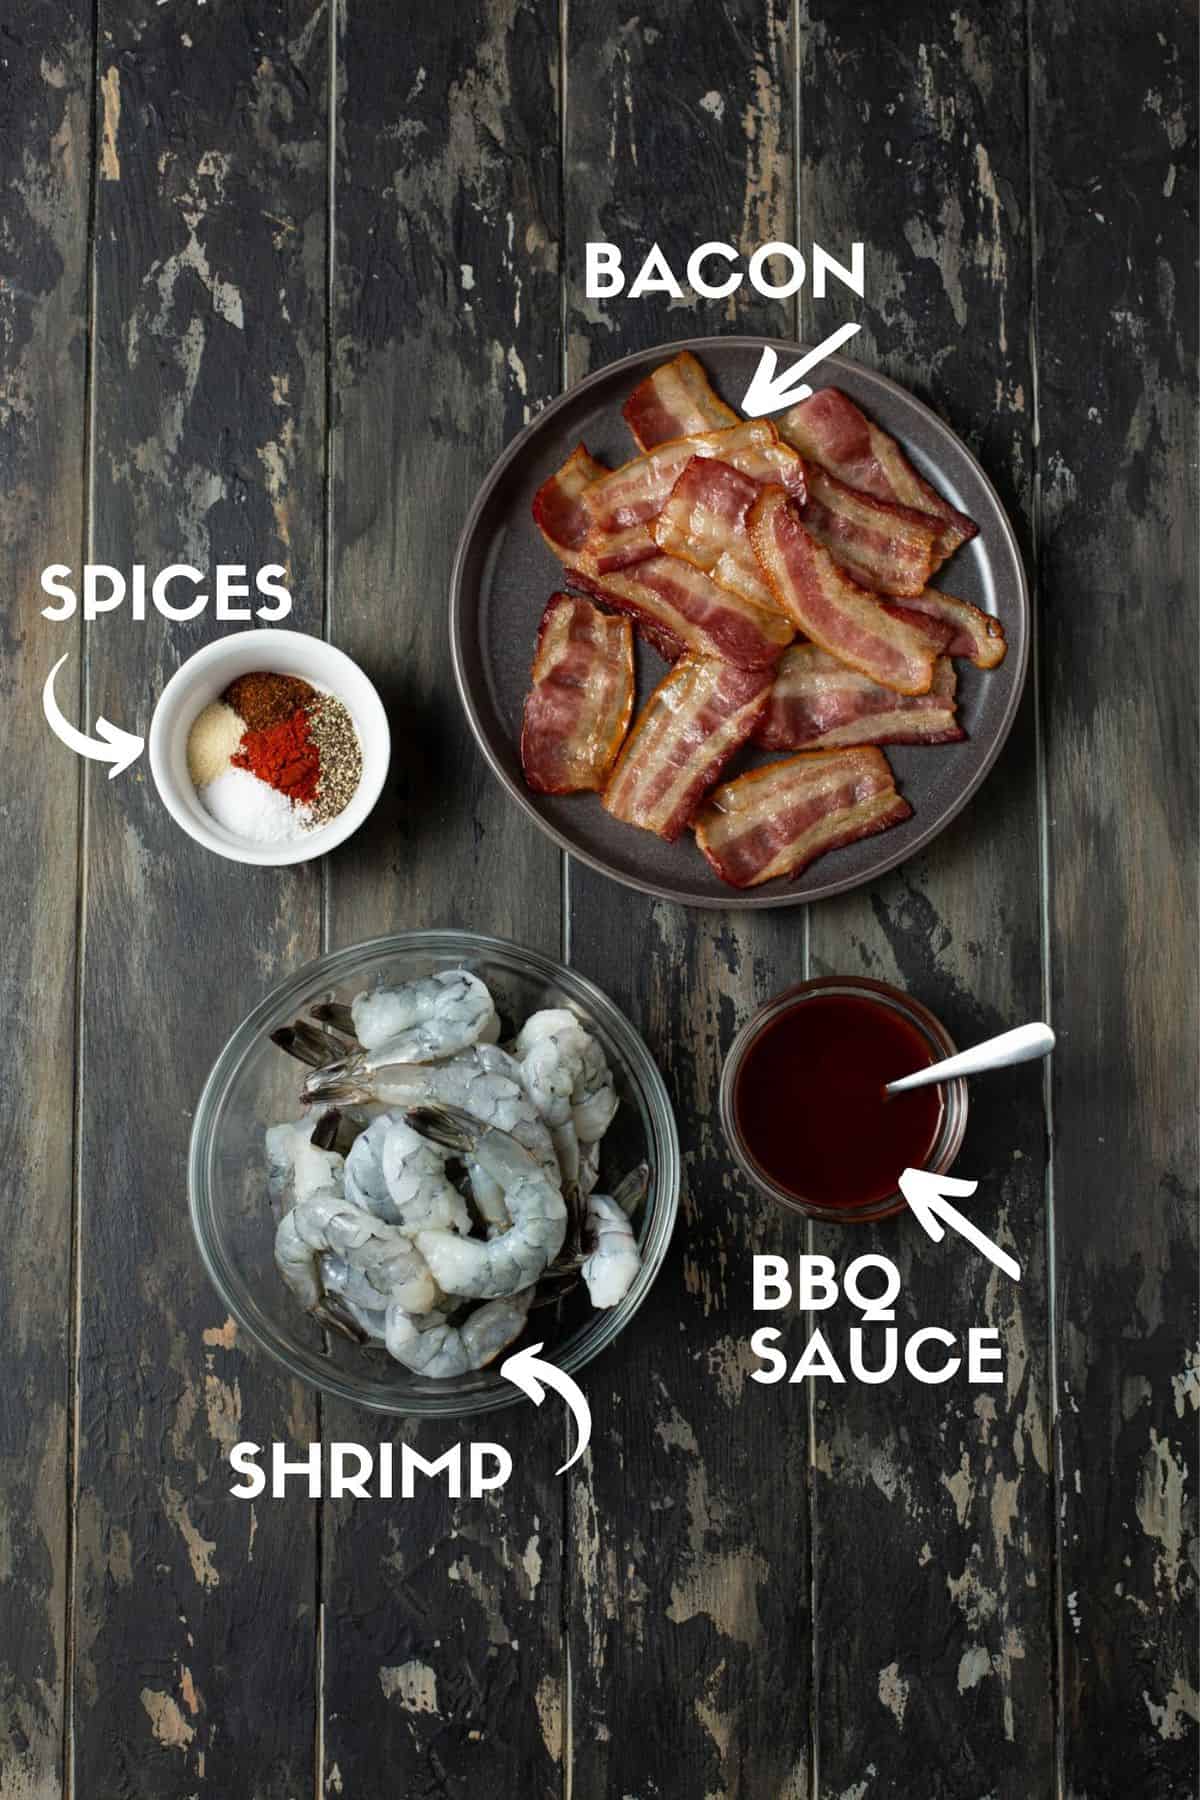 bacon on a plate, spices in a bowl, shrimp in a bowl and small bowl of BBQ sauce.